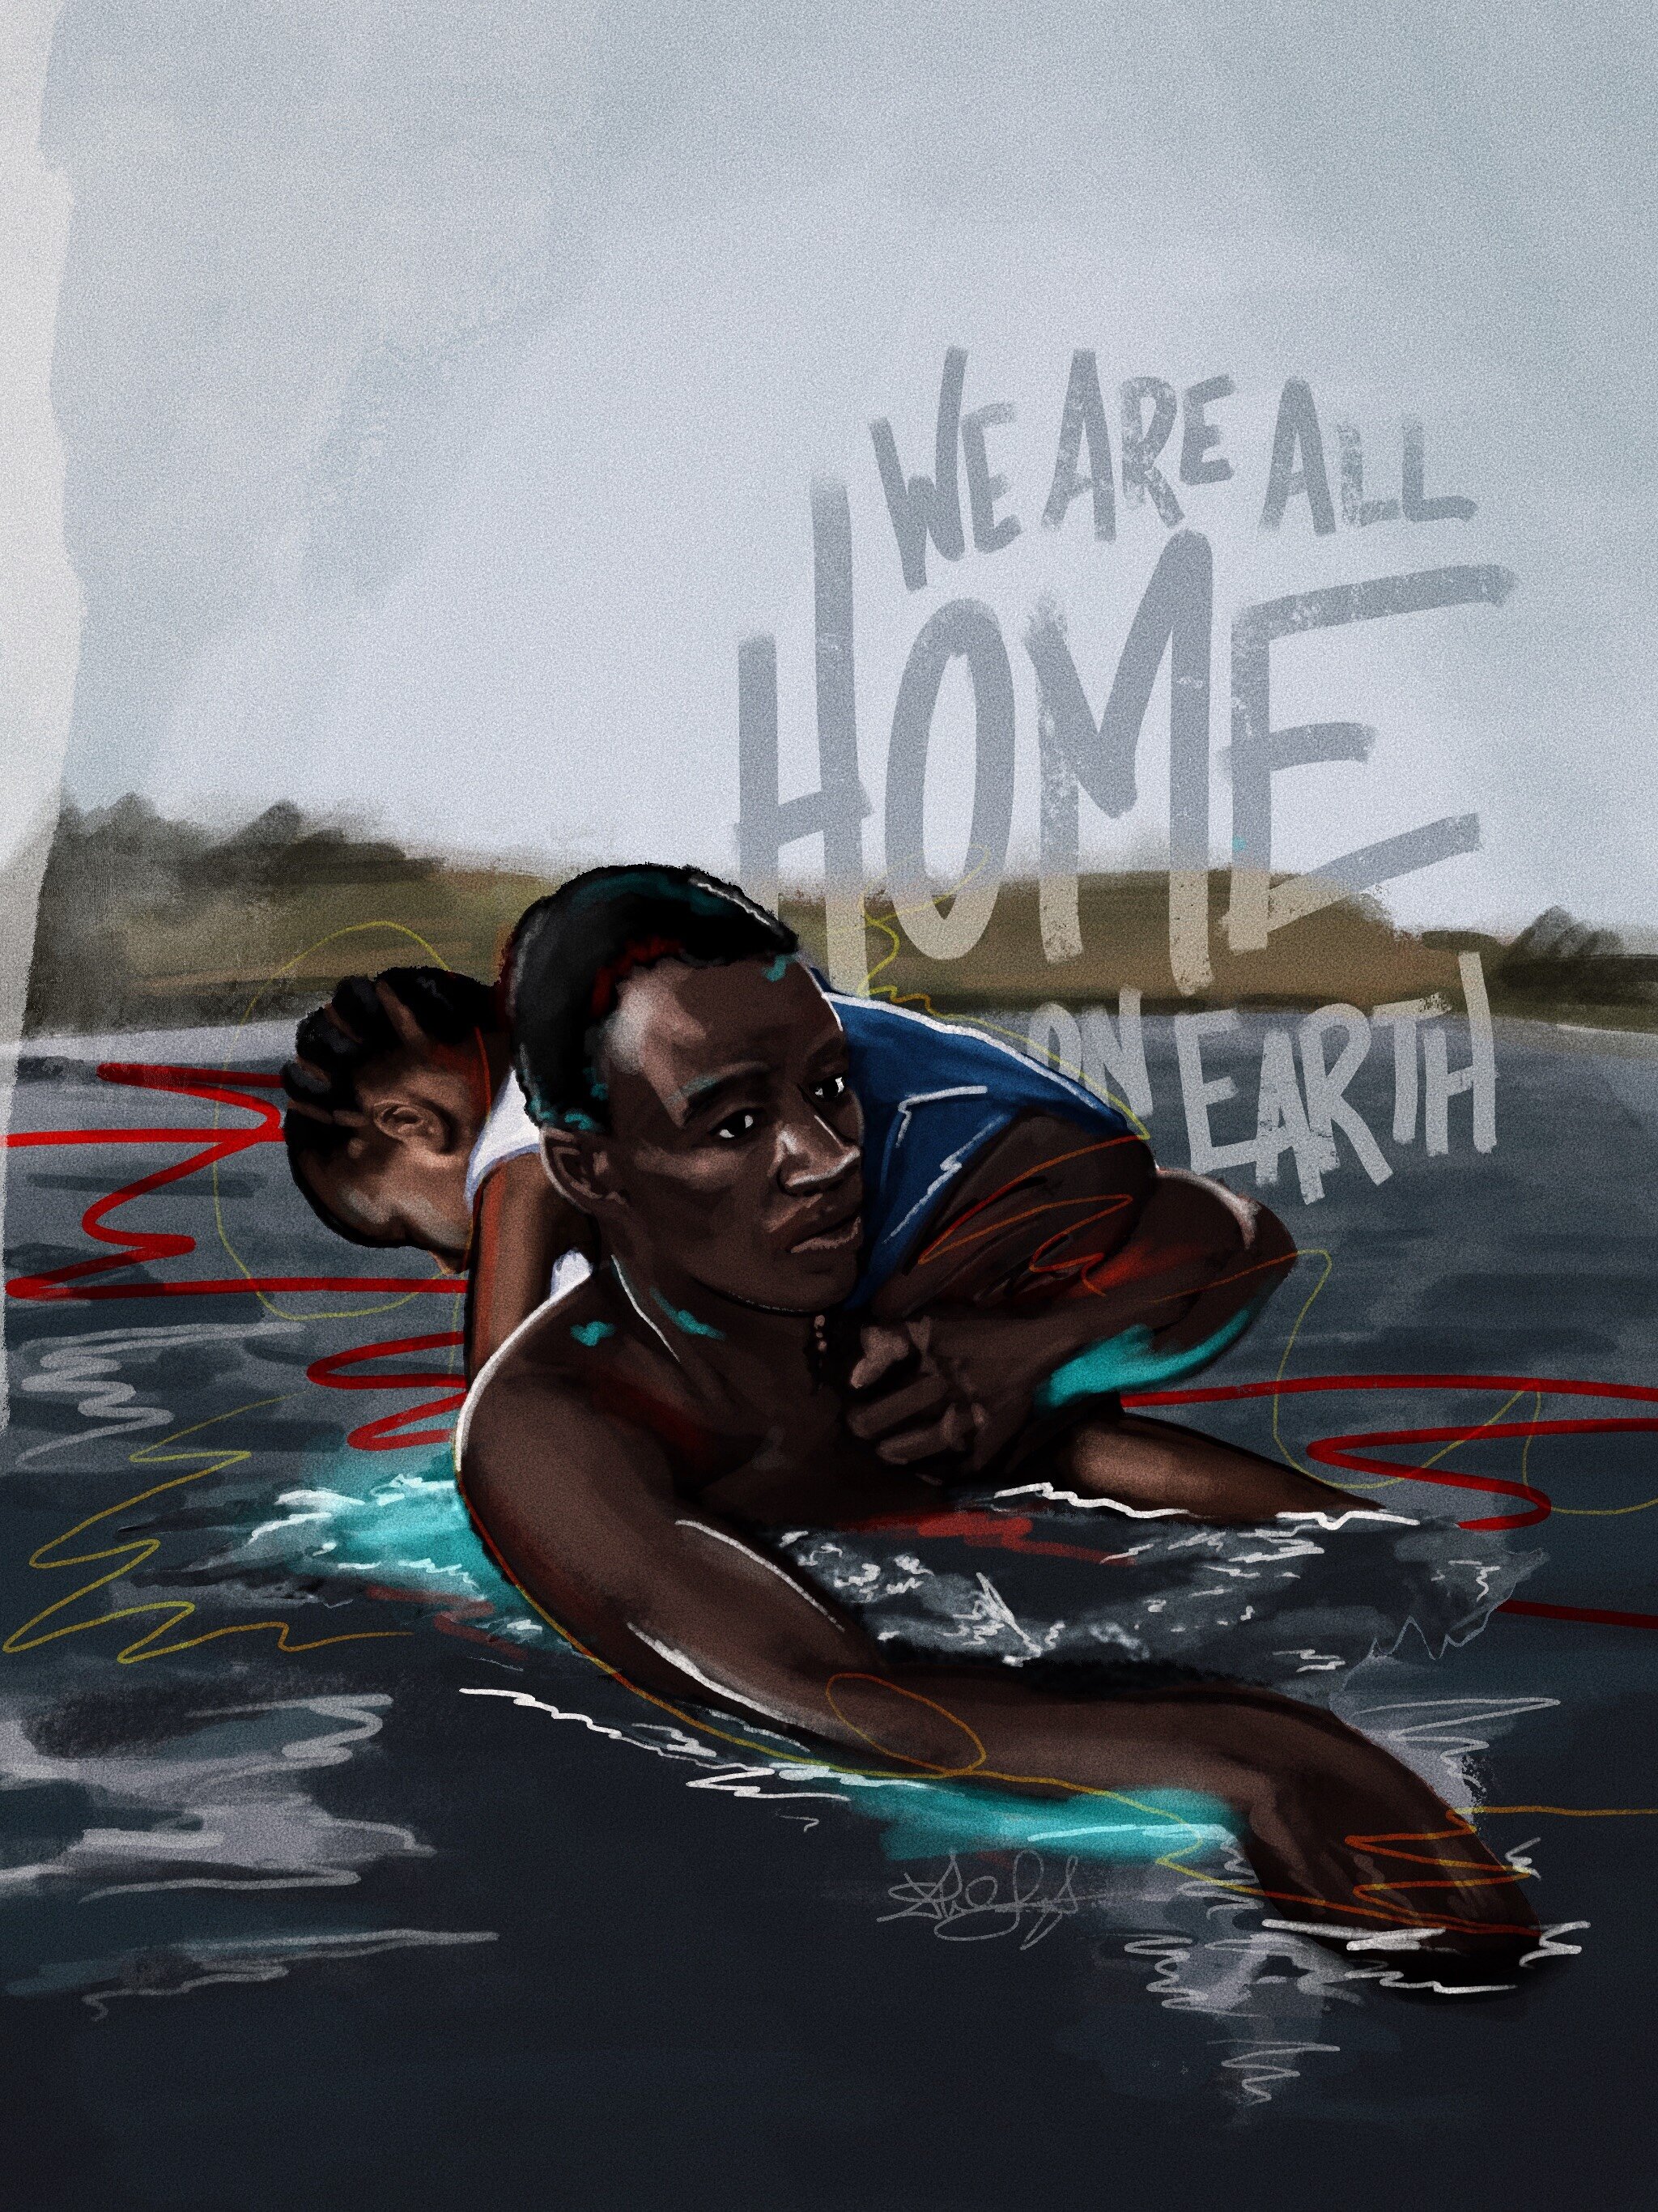 We Are All Home